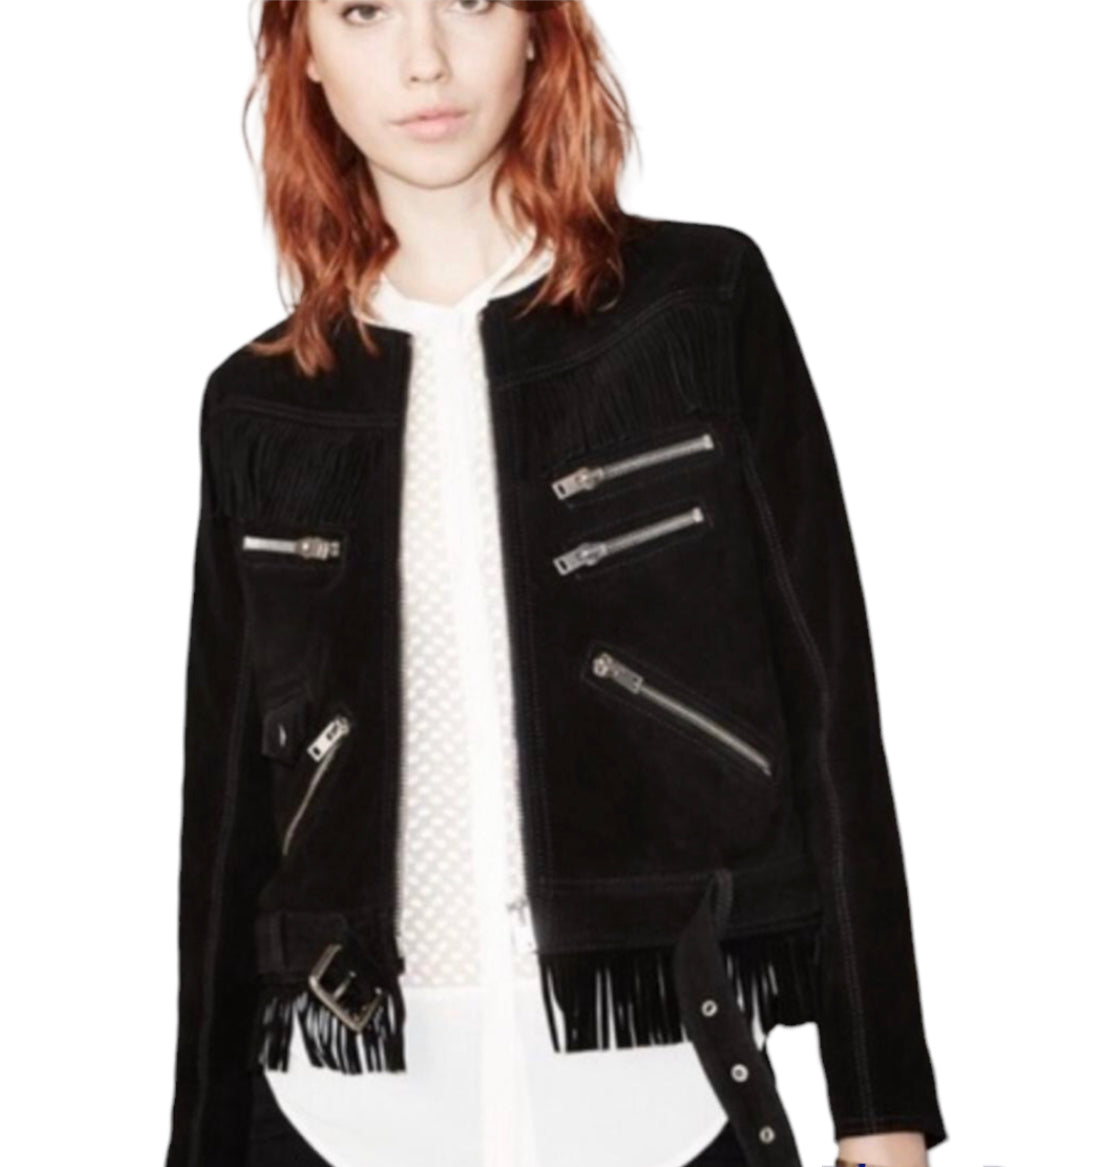 Load image into Gallery viewer, The Kooples Black Suede Fringed Jacket
